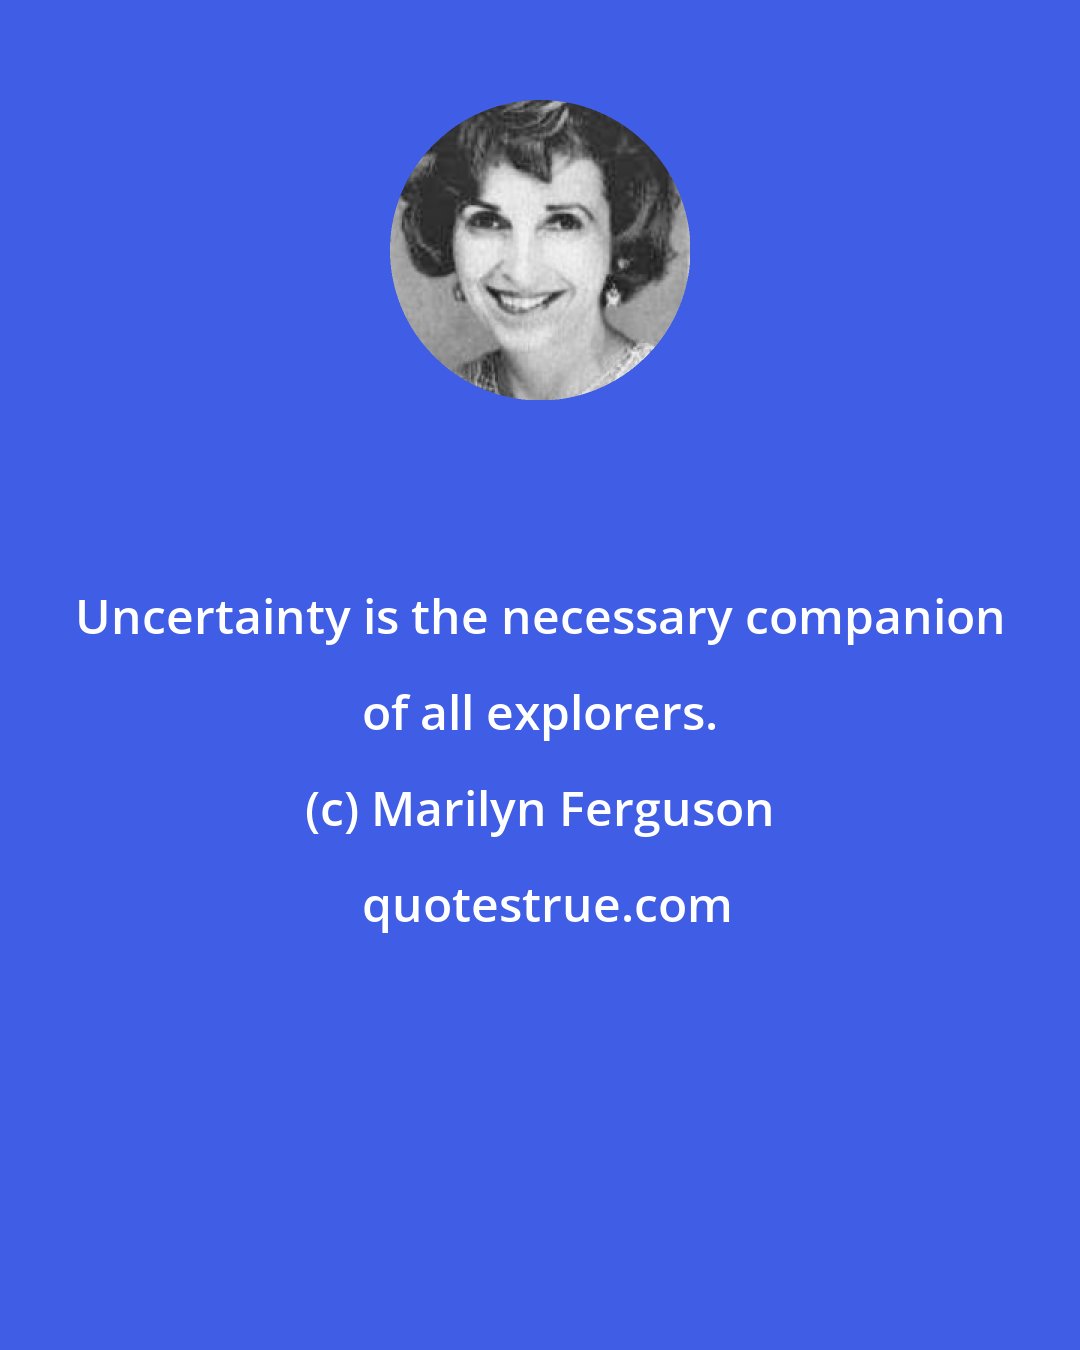 Marilyn Ferguson: Uncertainty is the necessary companion of all explorers.